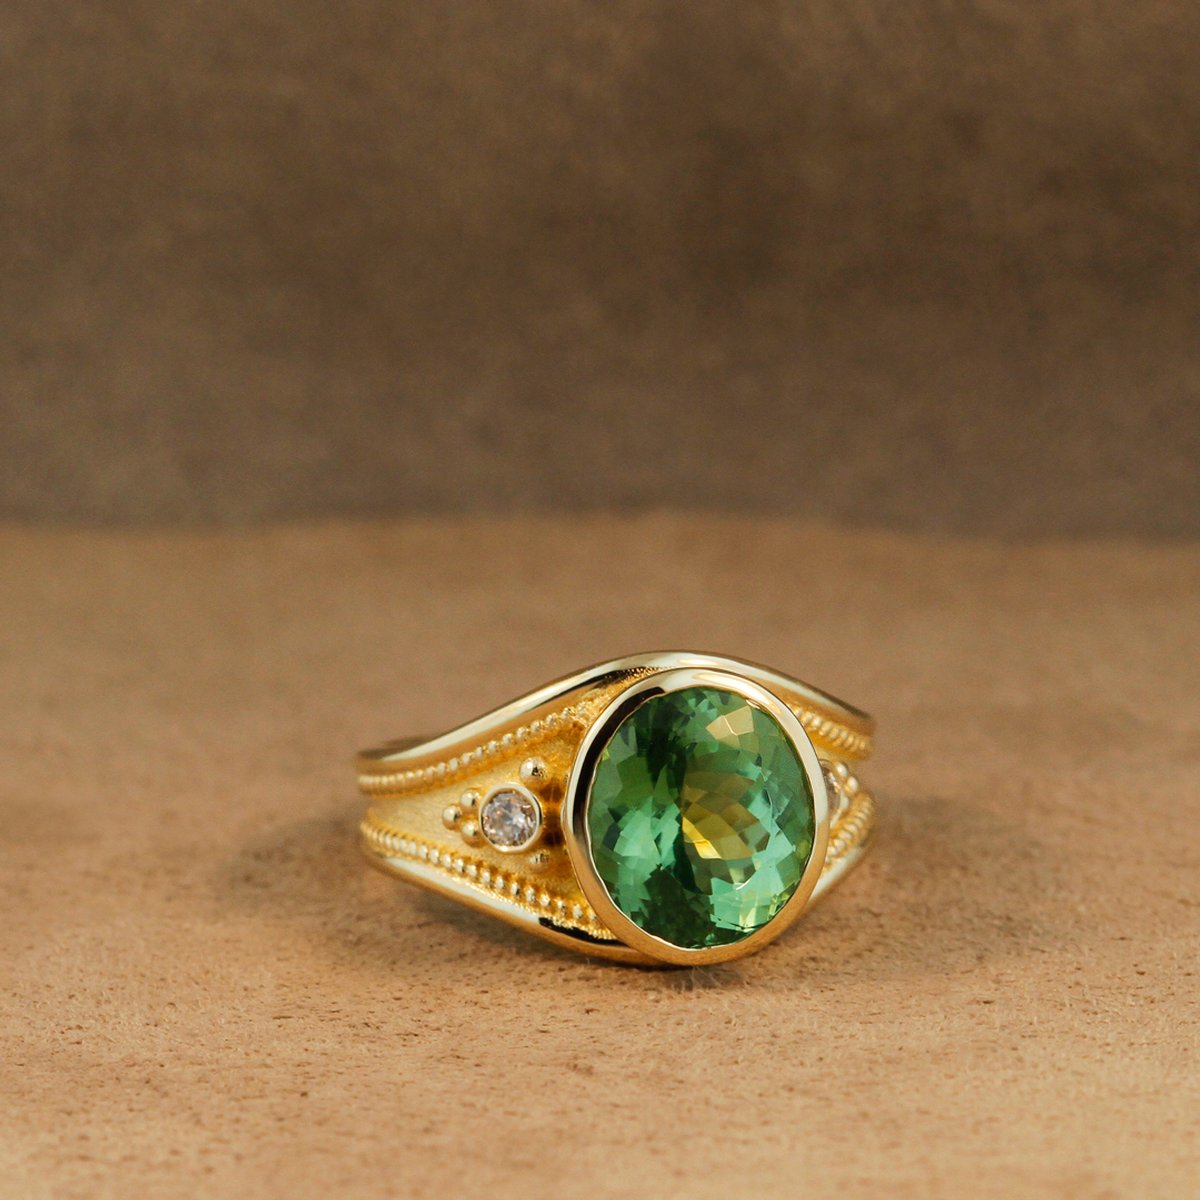 Etruscan Ring With Seafoam Green Tourmaline and Diamonds